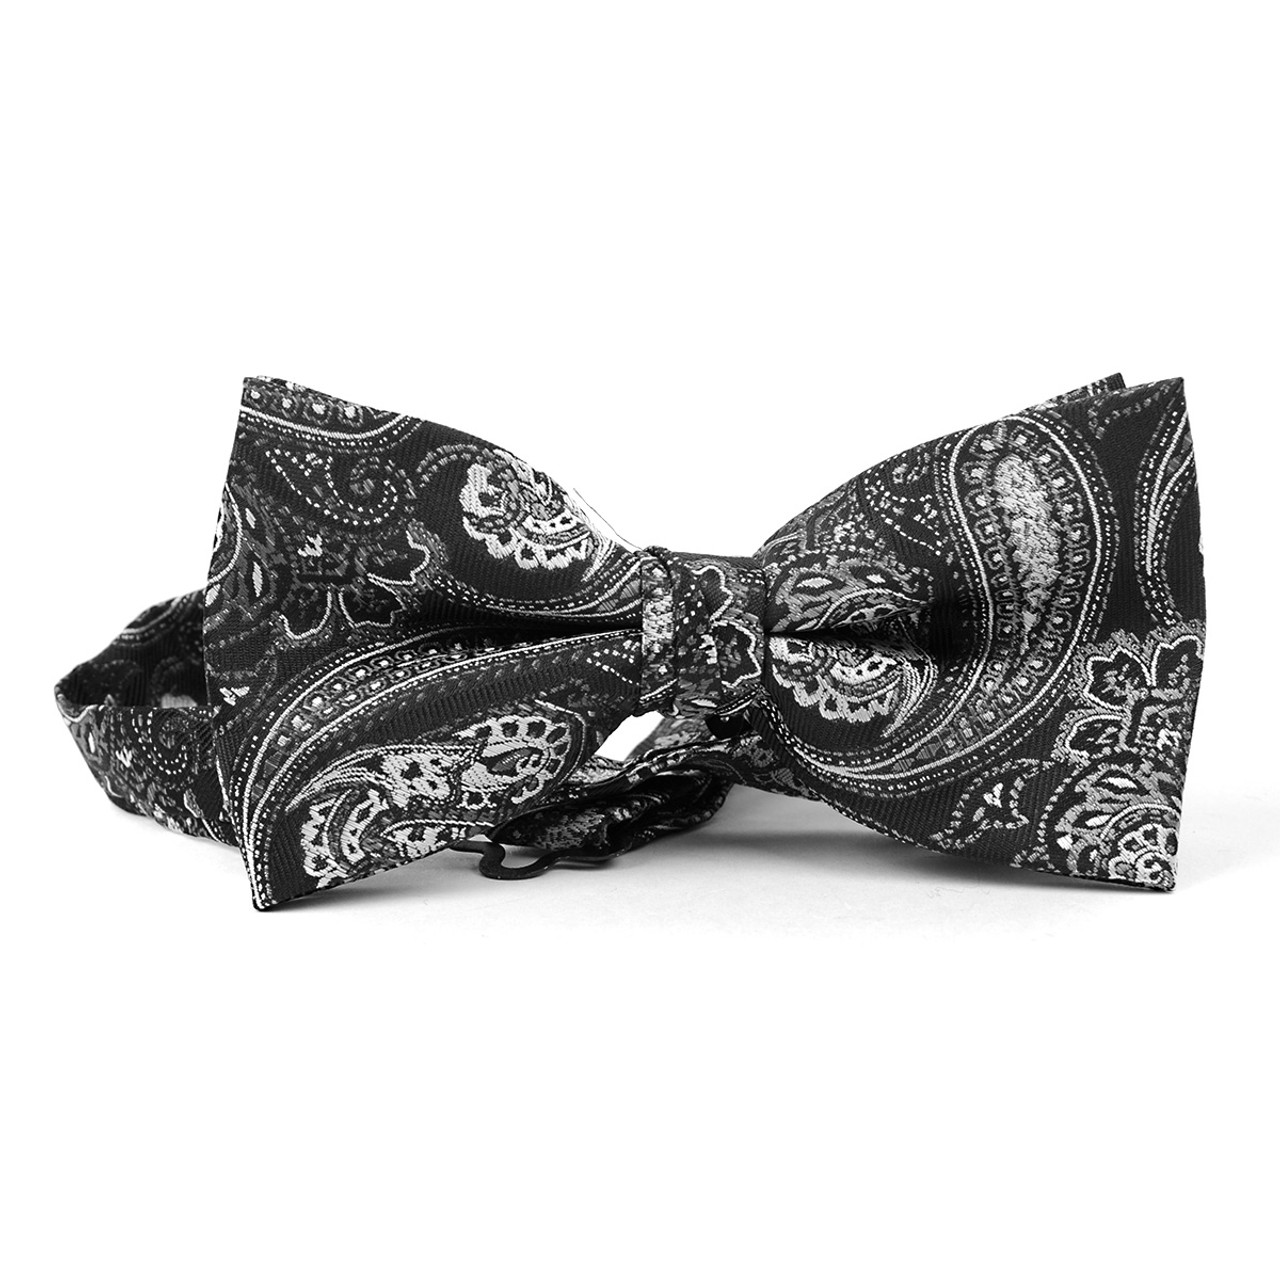 12pc Pack Assorted Paisley Pattern Men's Bow Tie & Matching Hanky